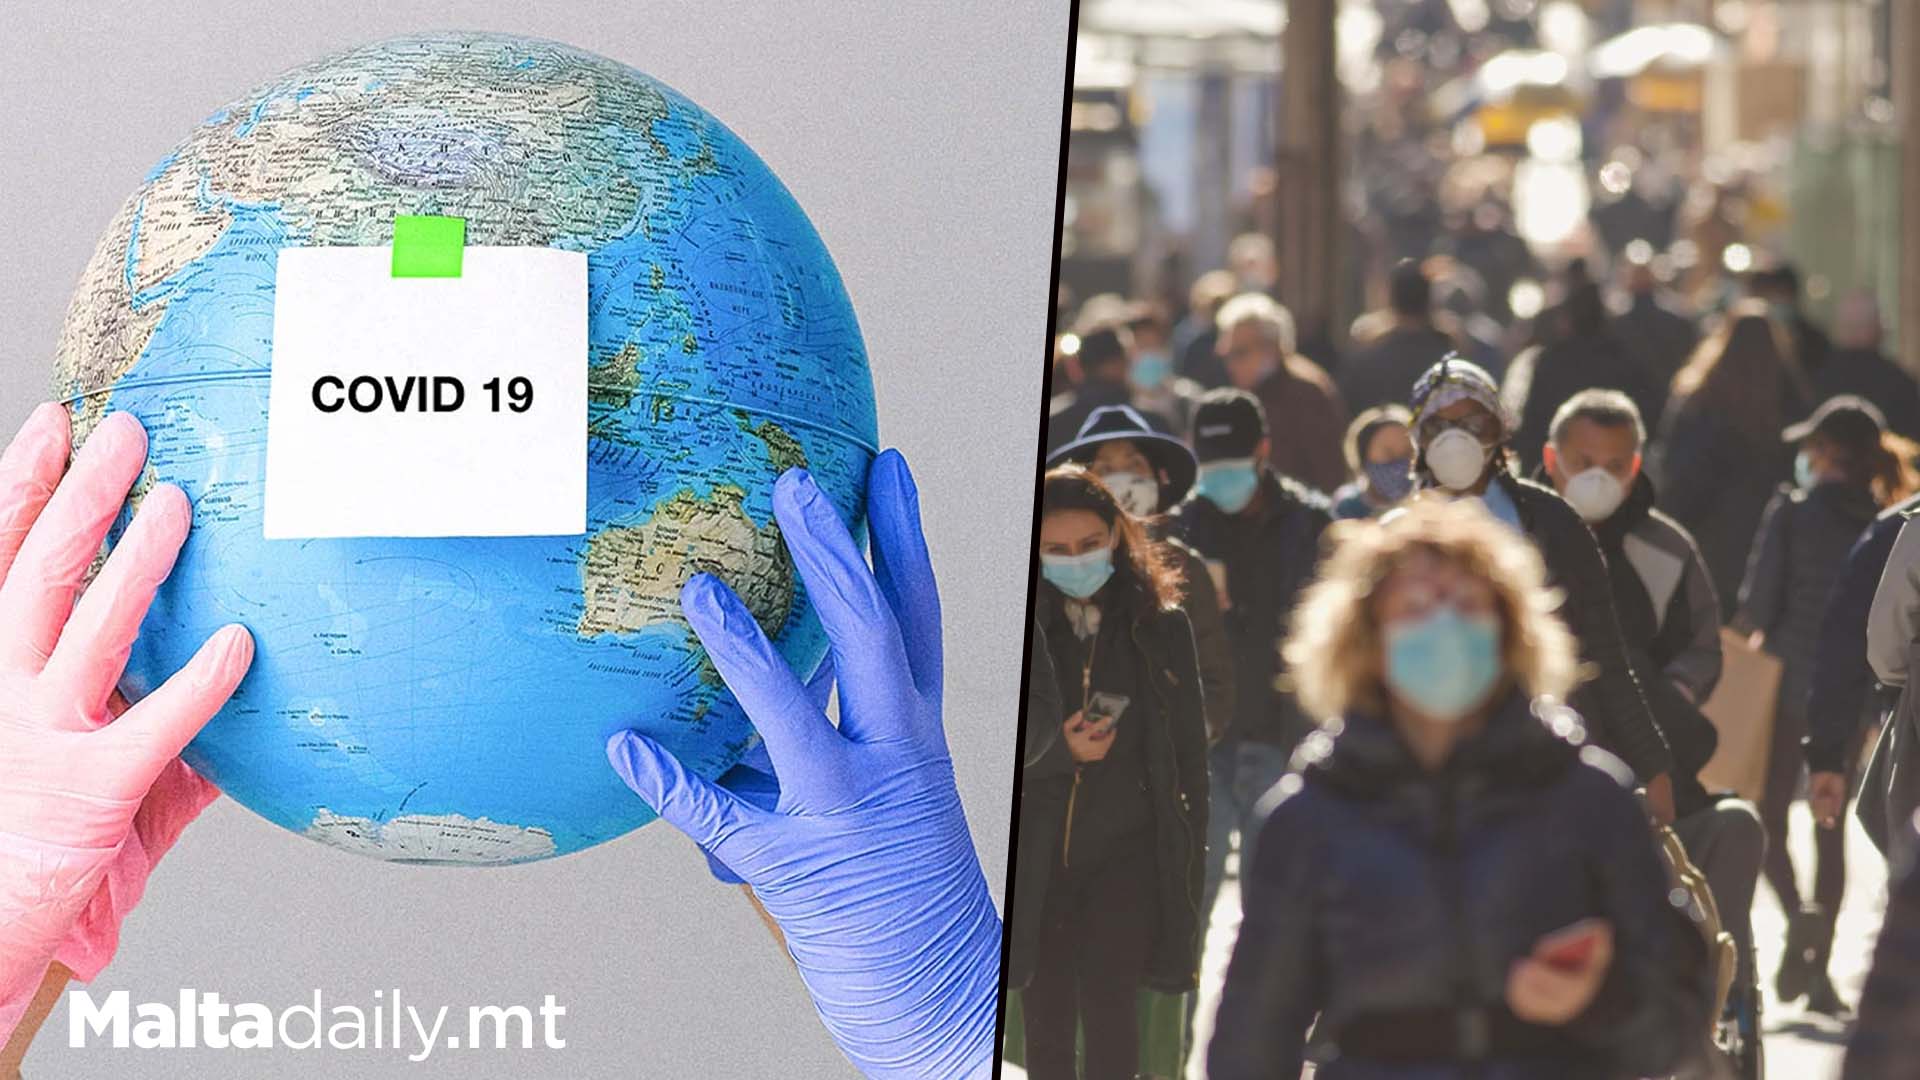 Covid-19 Was Declared A Global Pandemic 4 Years Ago